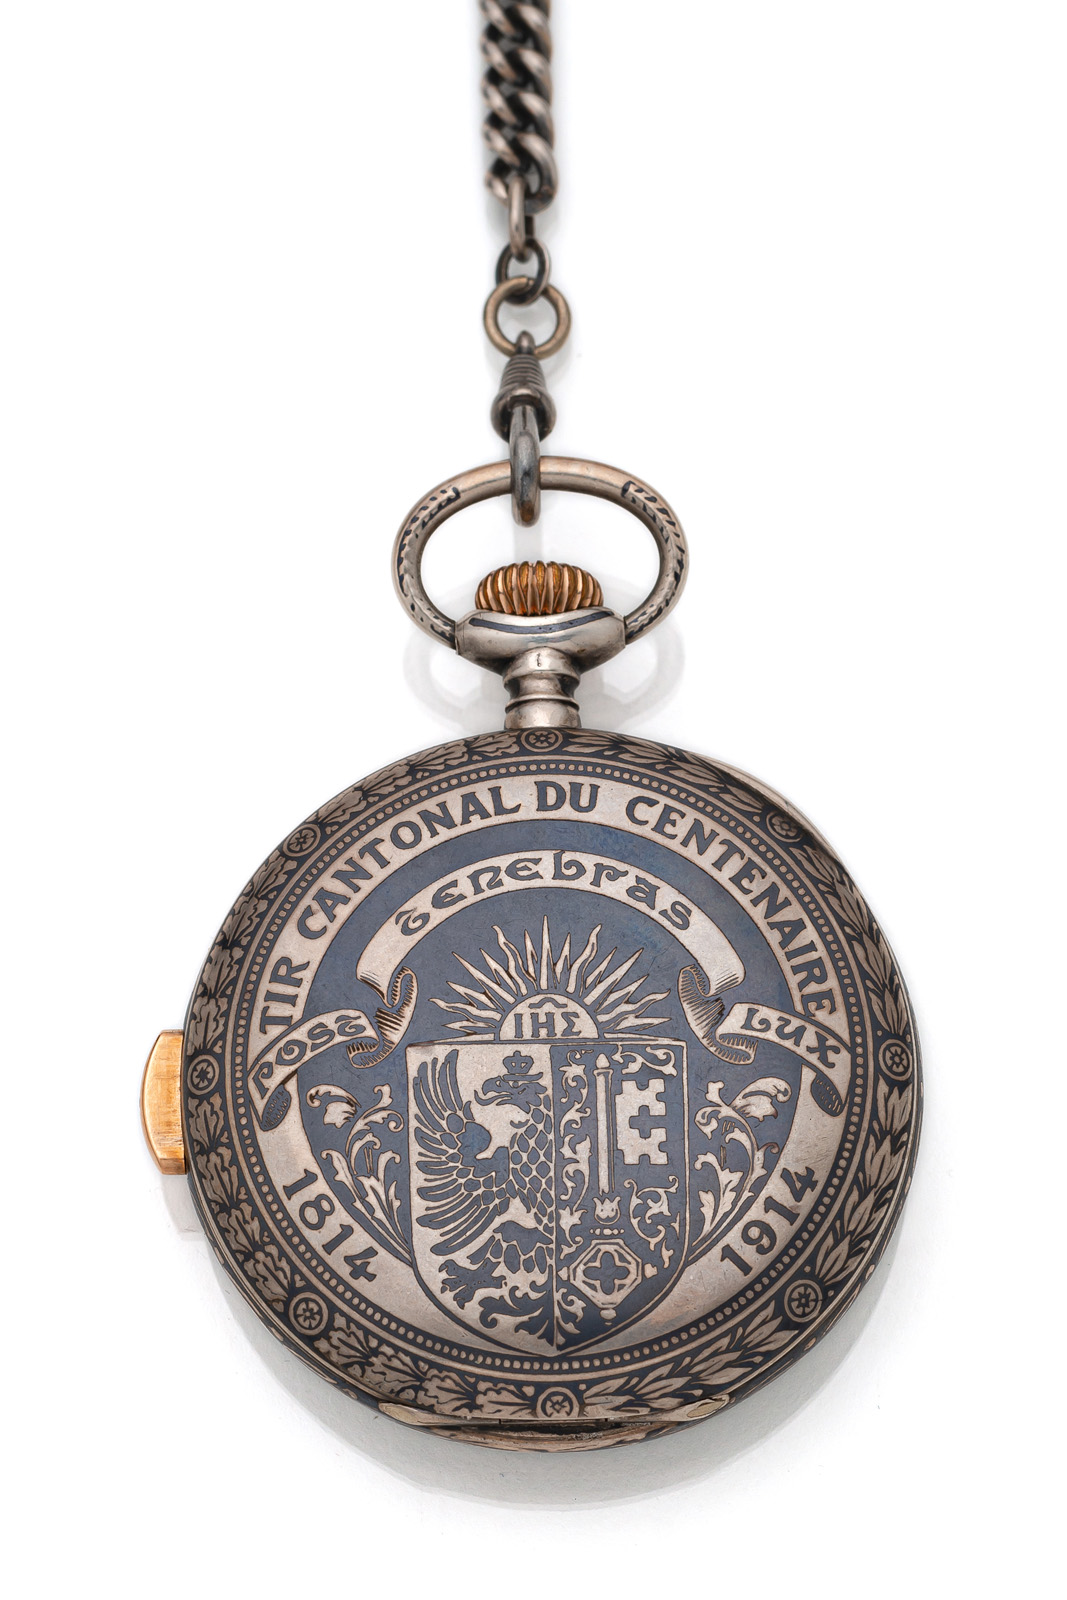 A SWISS POCKET WATCH WITH QUARTER REPETITION - Image 3 of 5